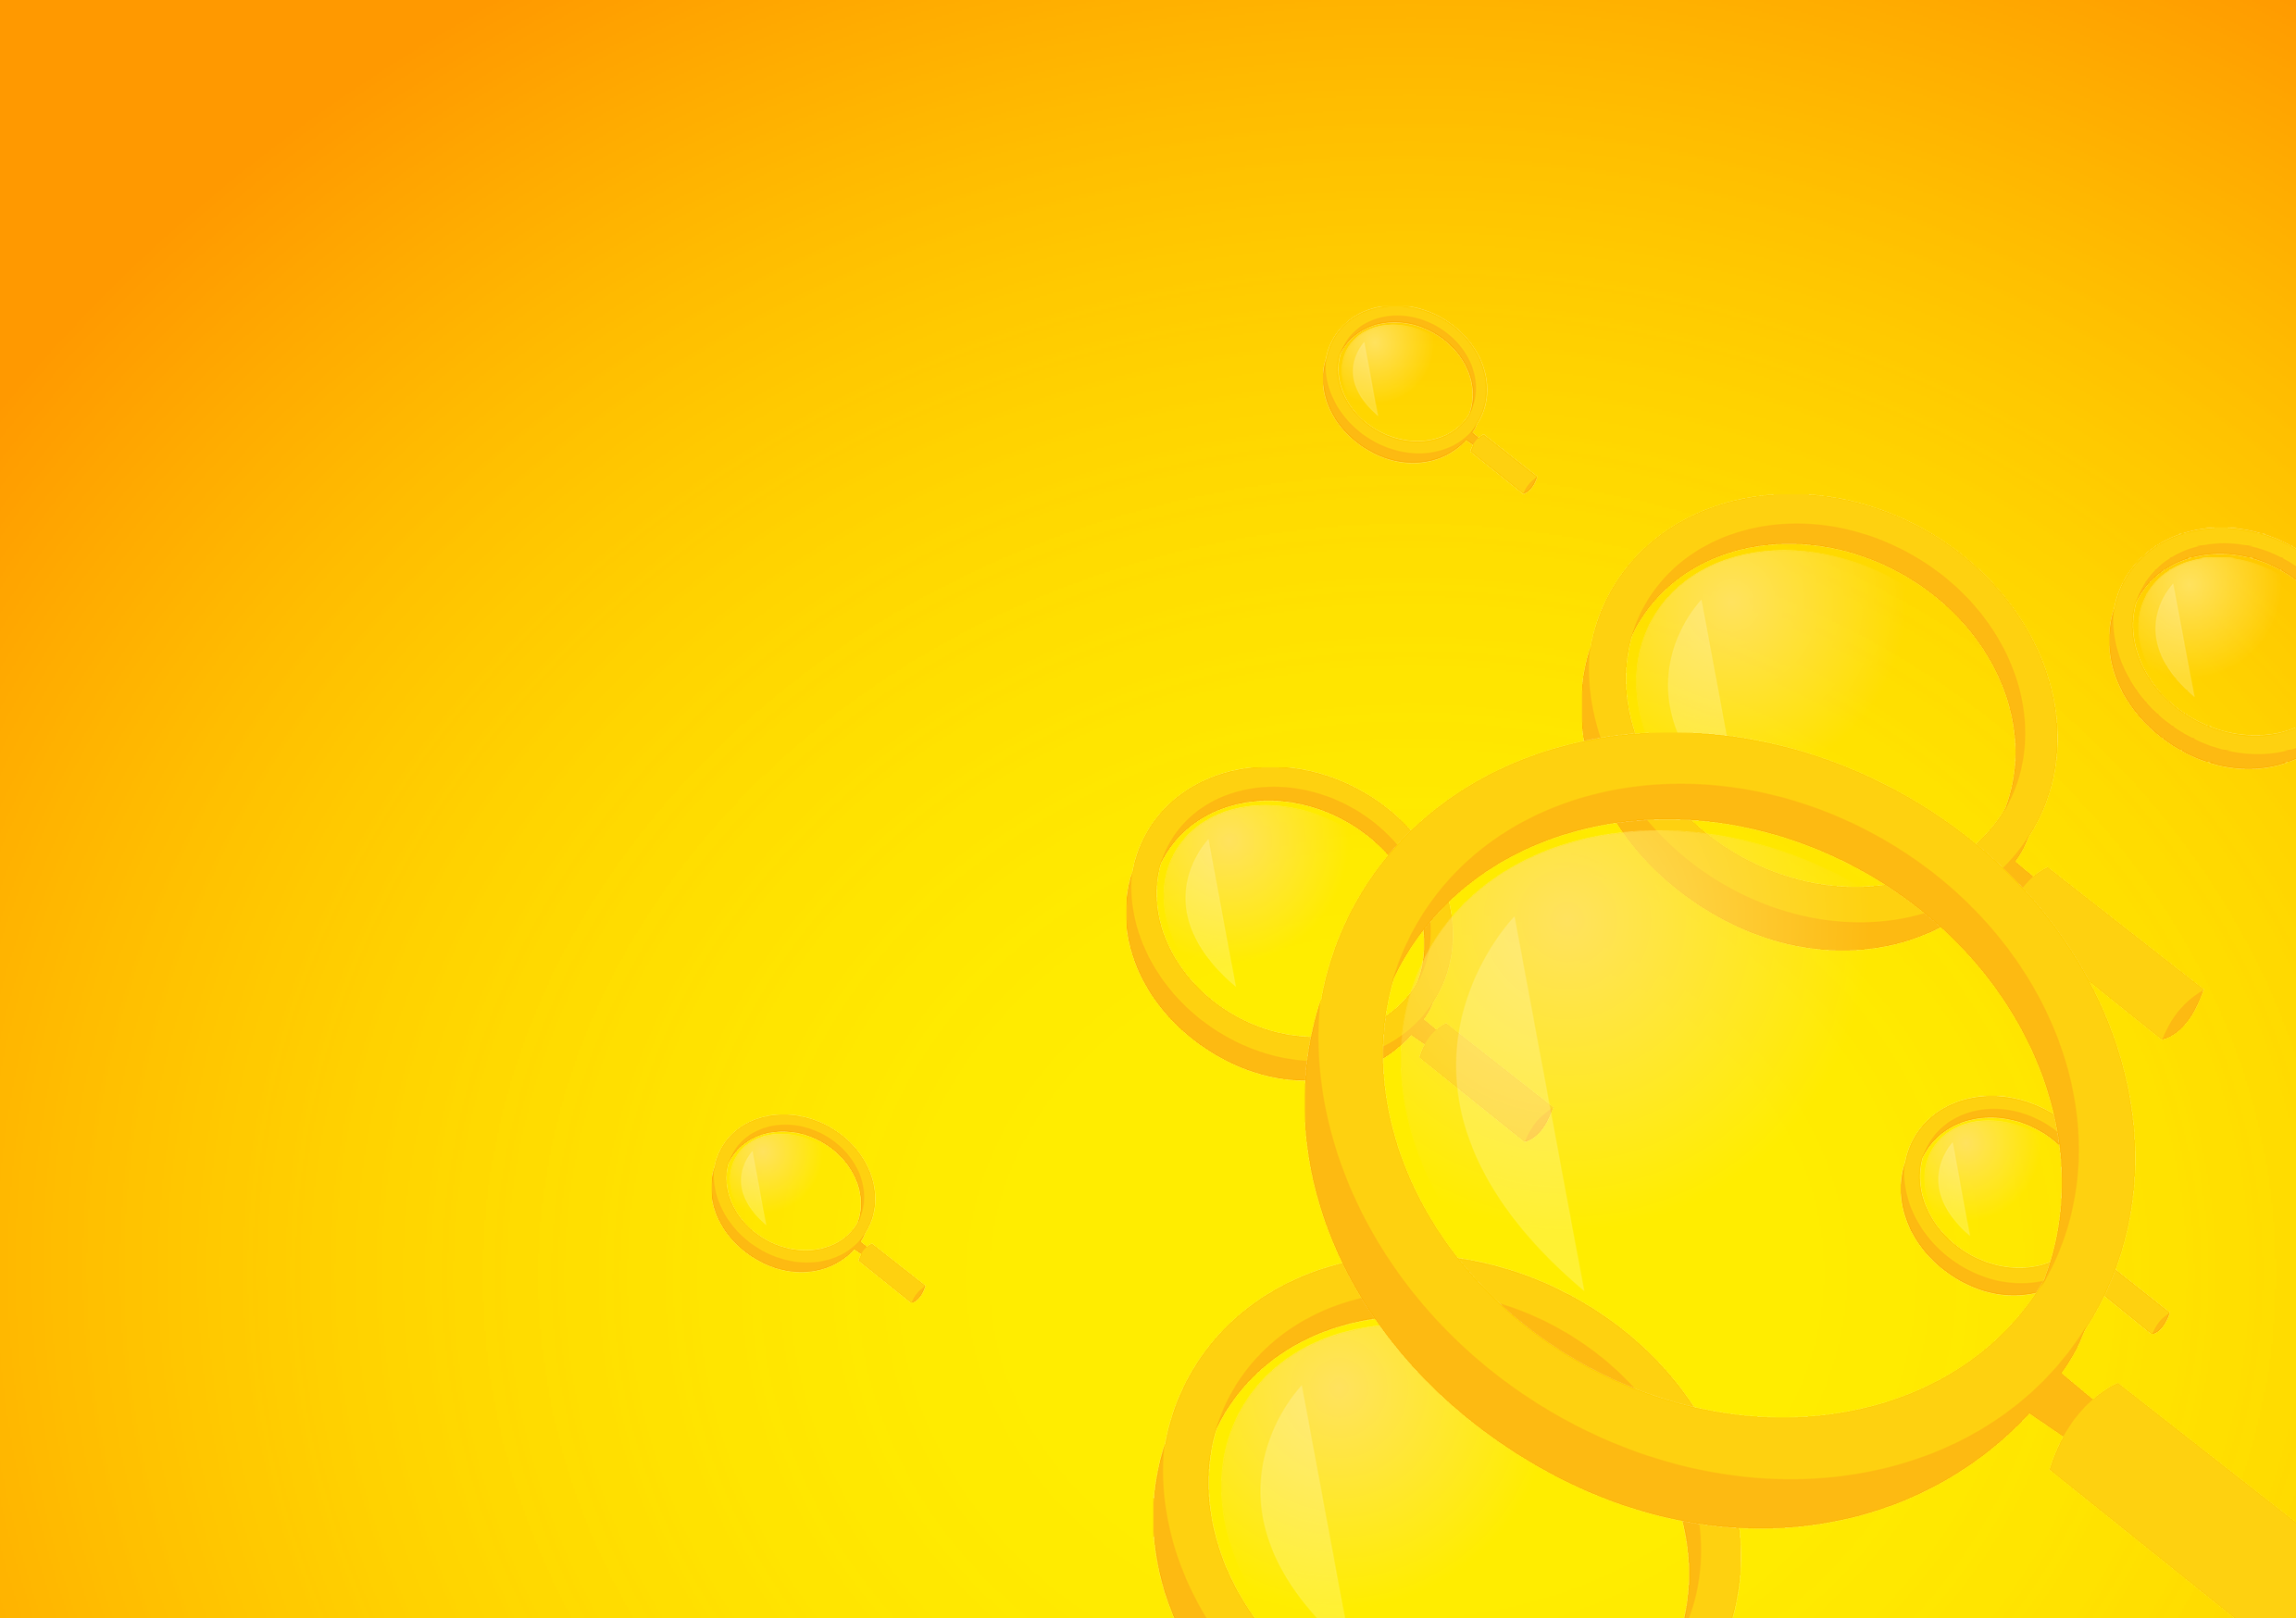 Gradien yellow-orage background with 3D magnifiers